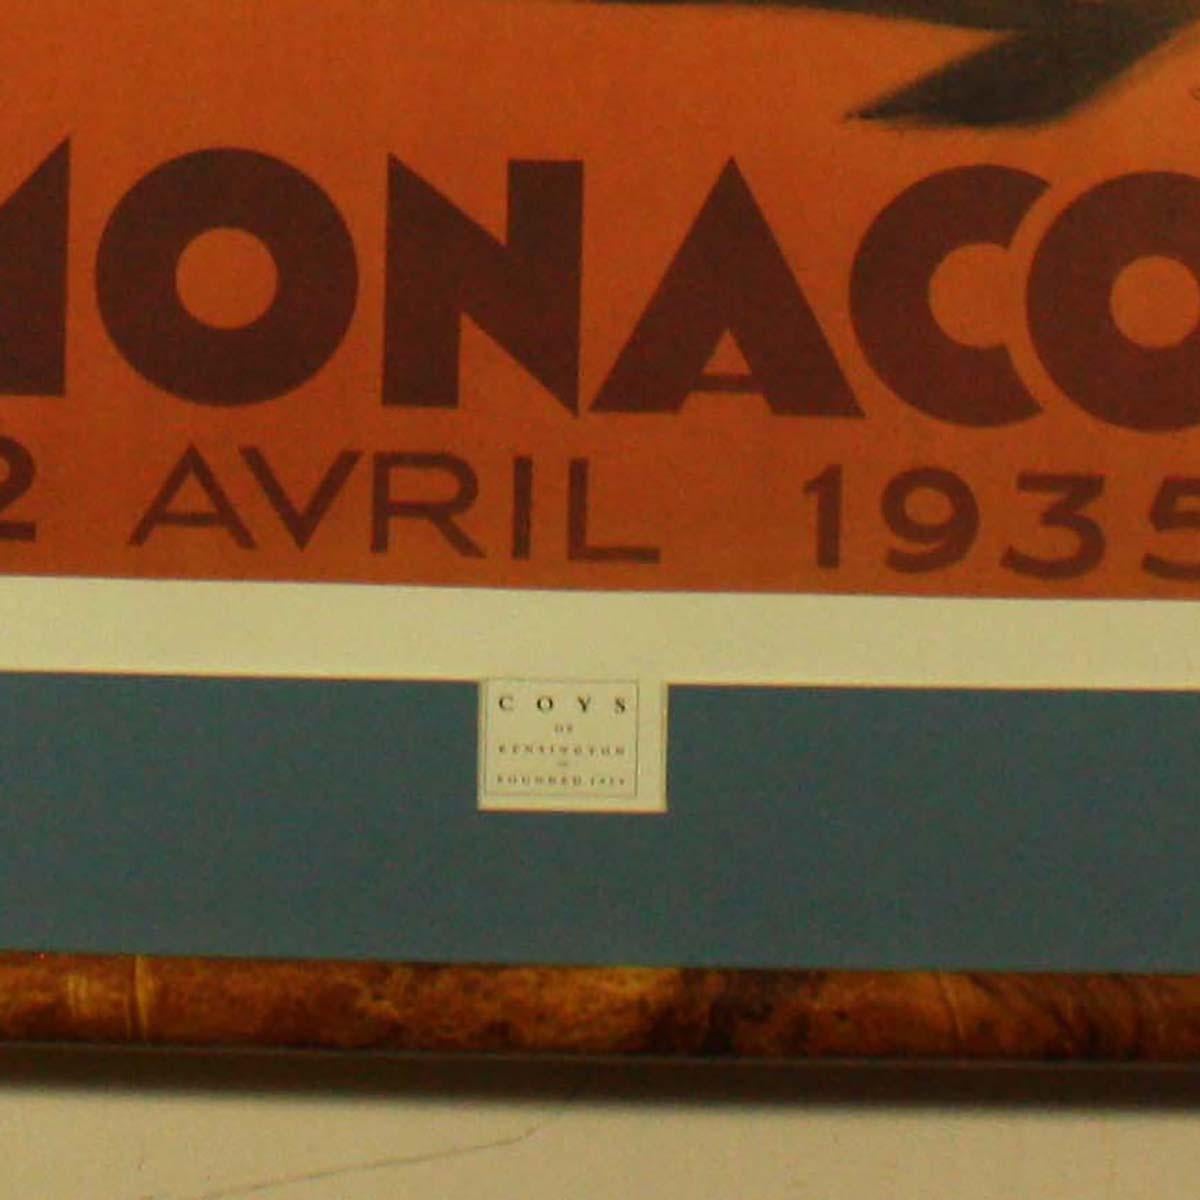 Monaco 7 Grand Prix 1935 Limited Edition Poster by Geo Ham
Limited Edition Print No 540/850
With Coy's Certificate on Back
Winner: Luigi Fagioli in a Mercedes-Benz W 25 750-kg Formula racing car
Average speed 93.6 km/h (course record).

The first